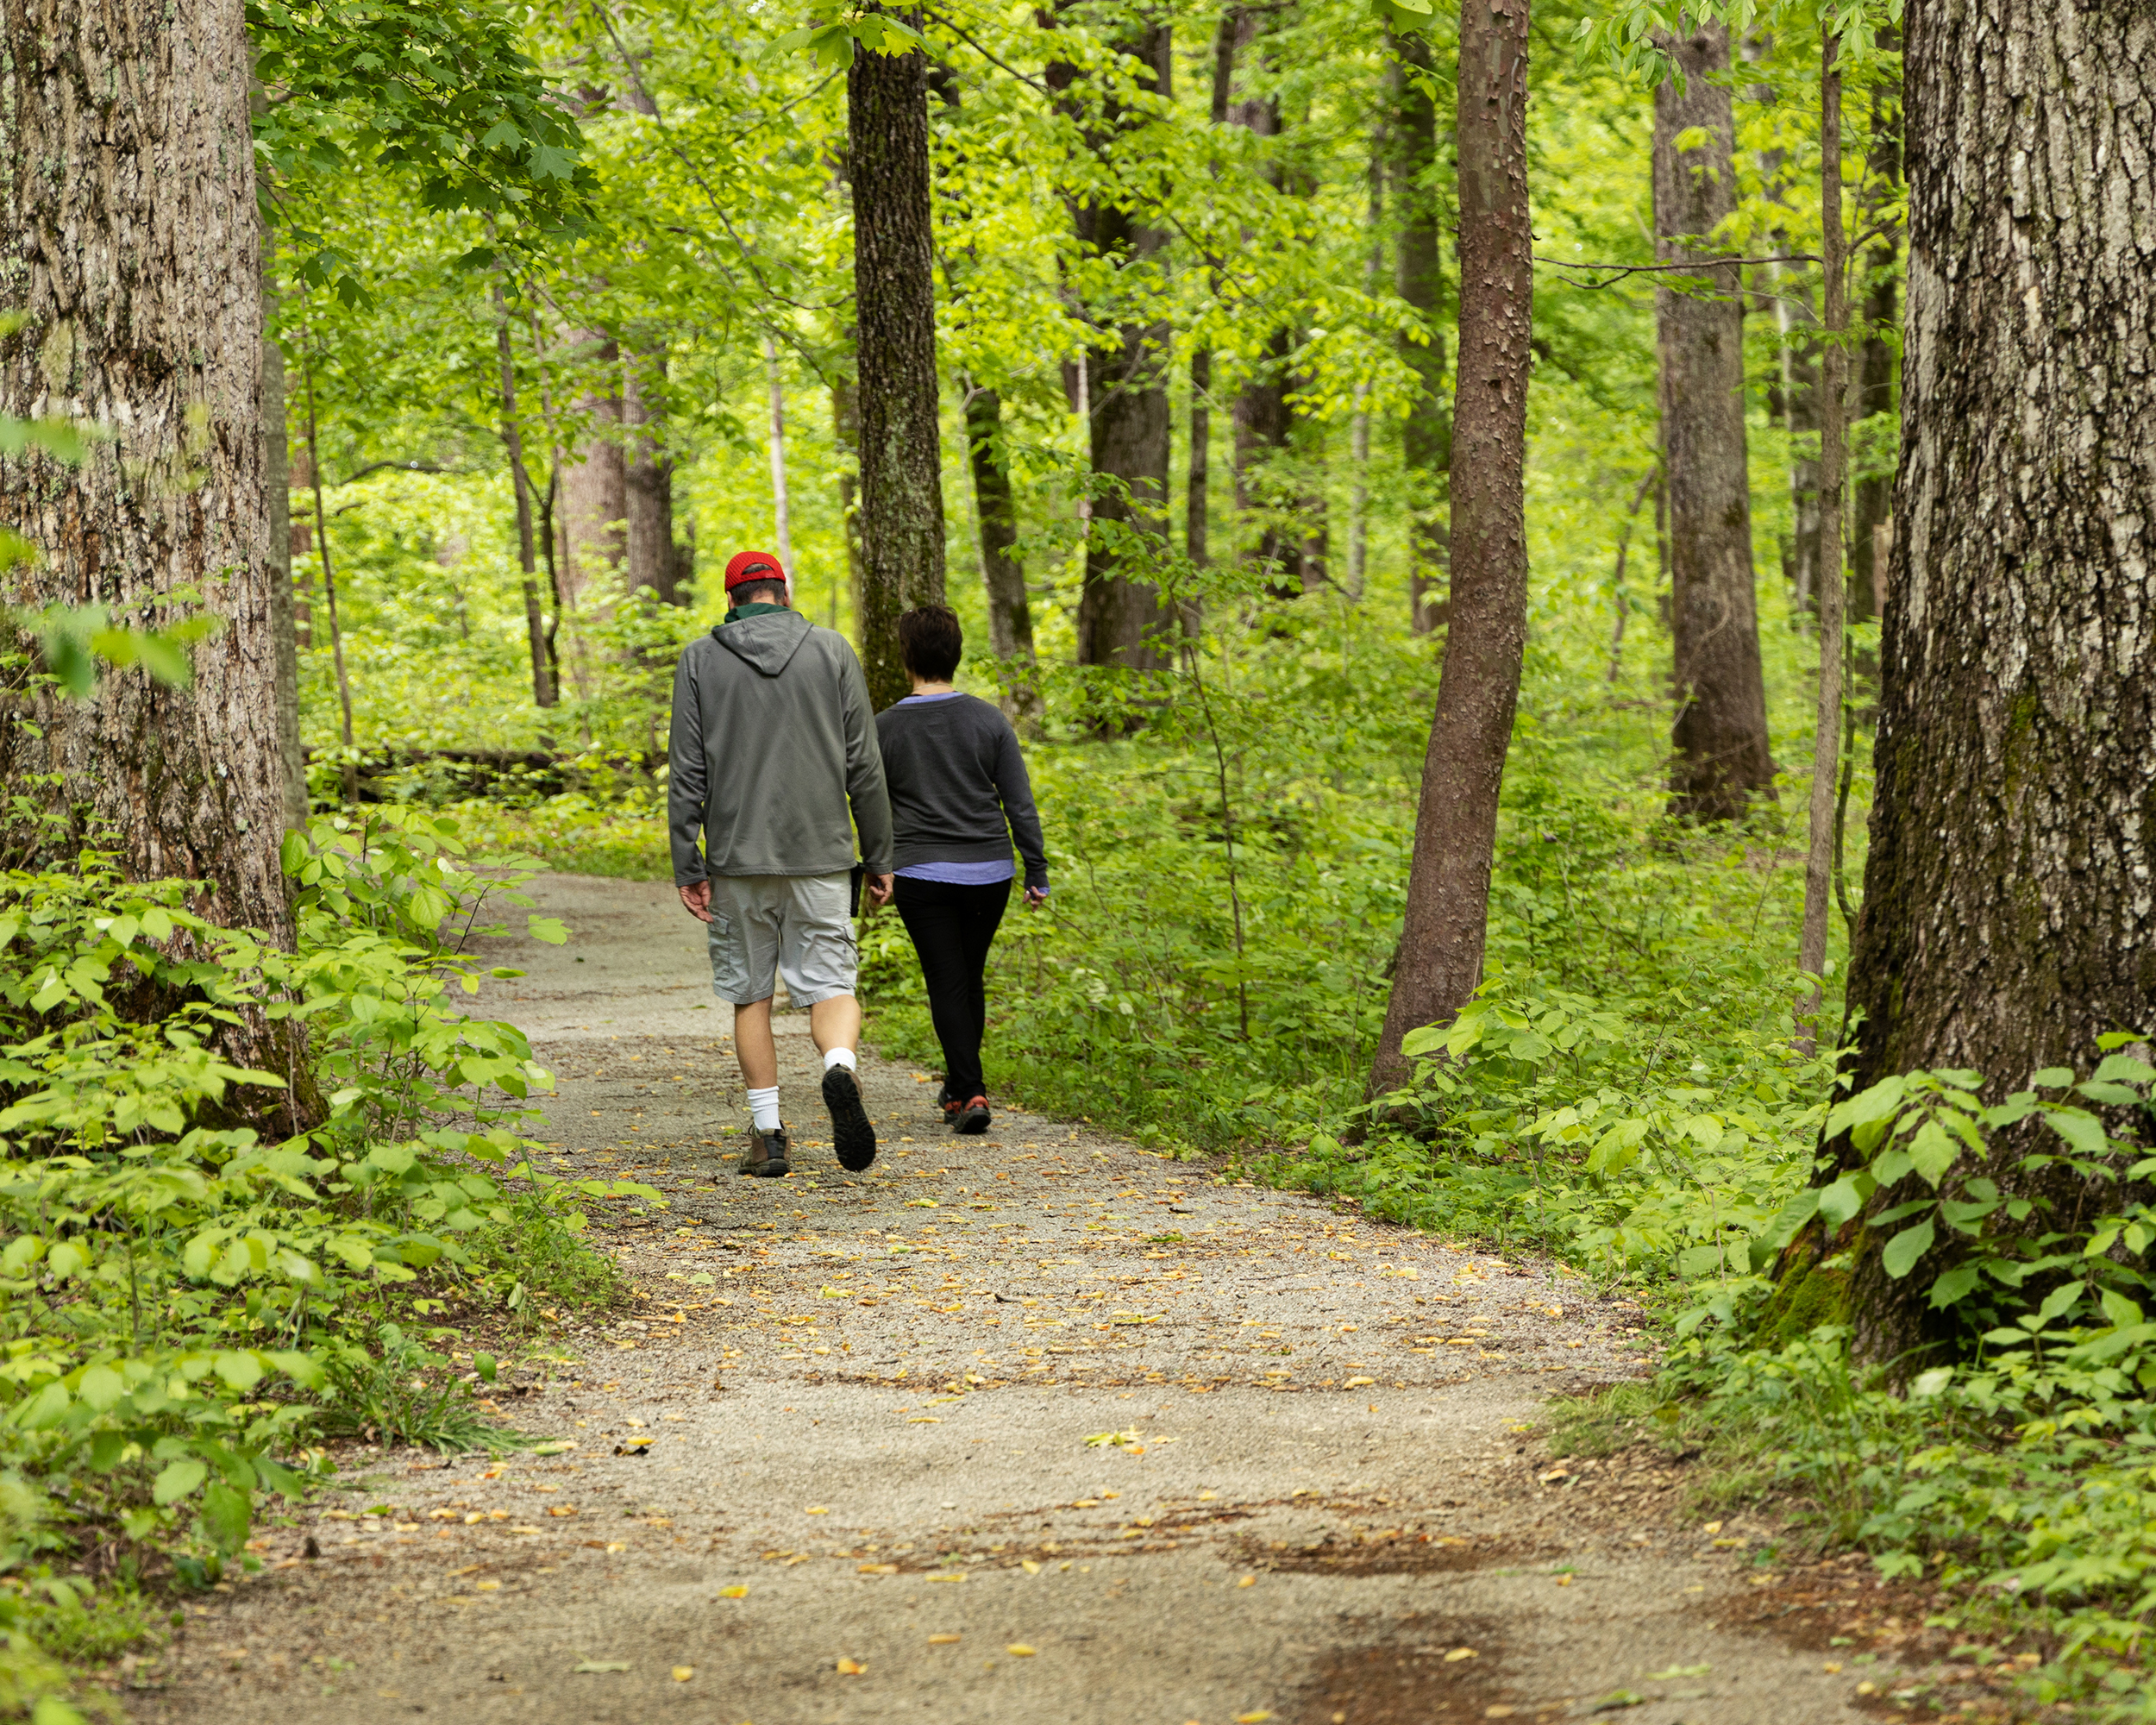 Two people walk on a gravel dirt trail in a green forest.